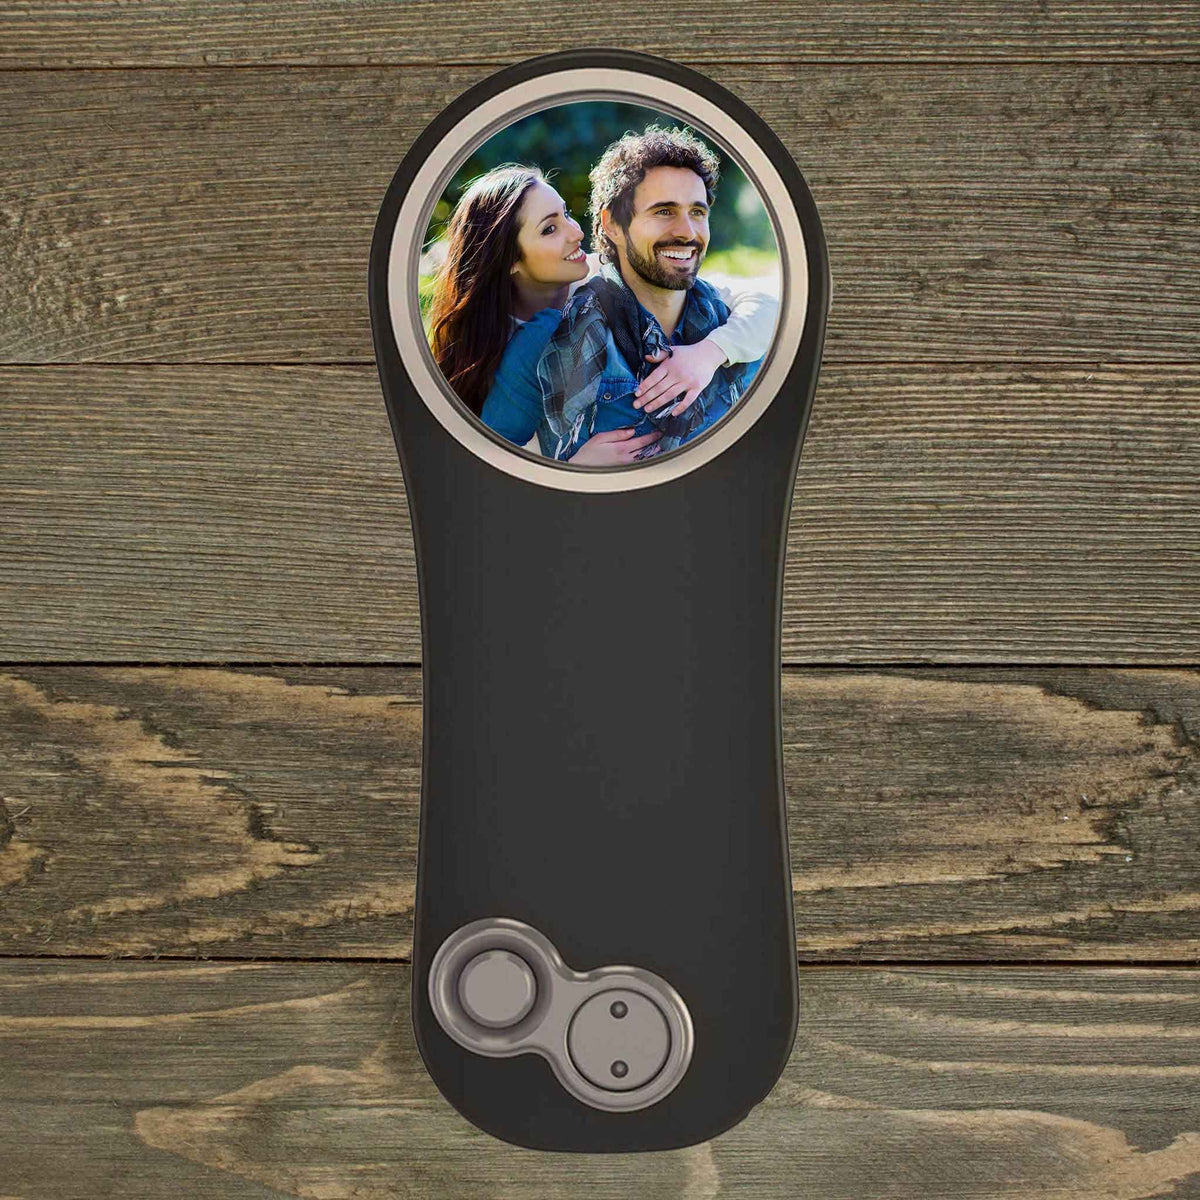 Personalized PitchFix Divot Tool | Golf Accessories | Golf Gifts | Custom Photo